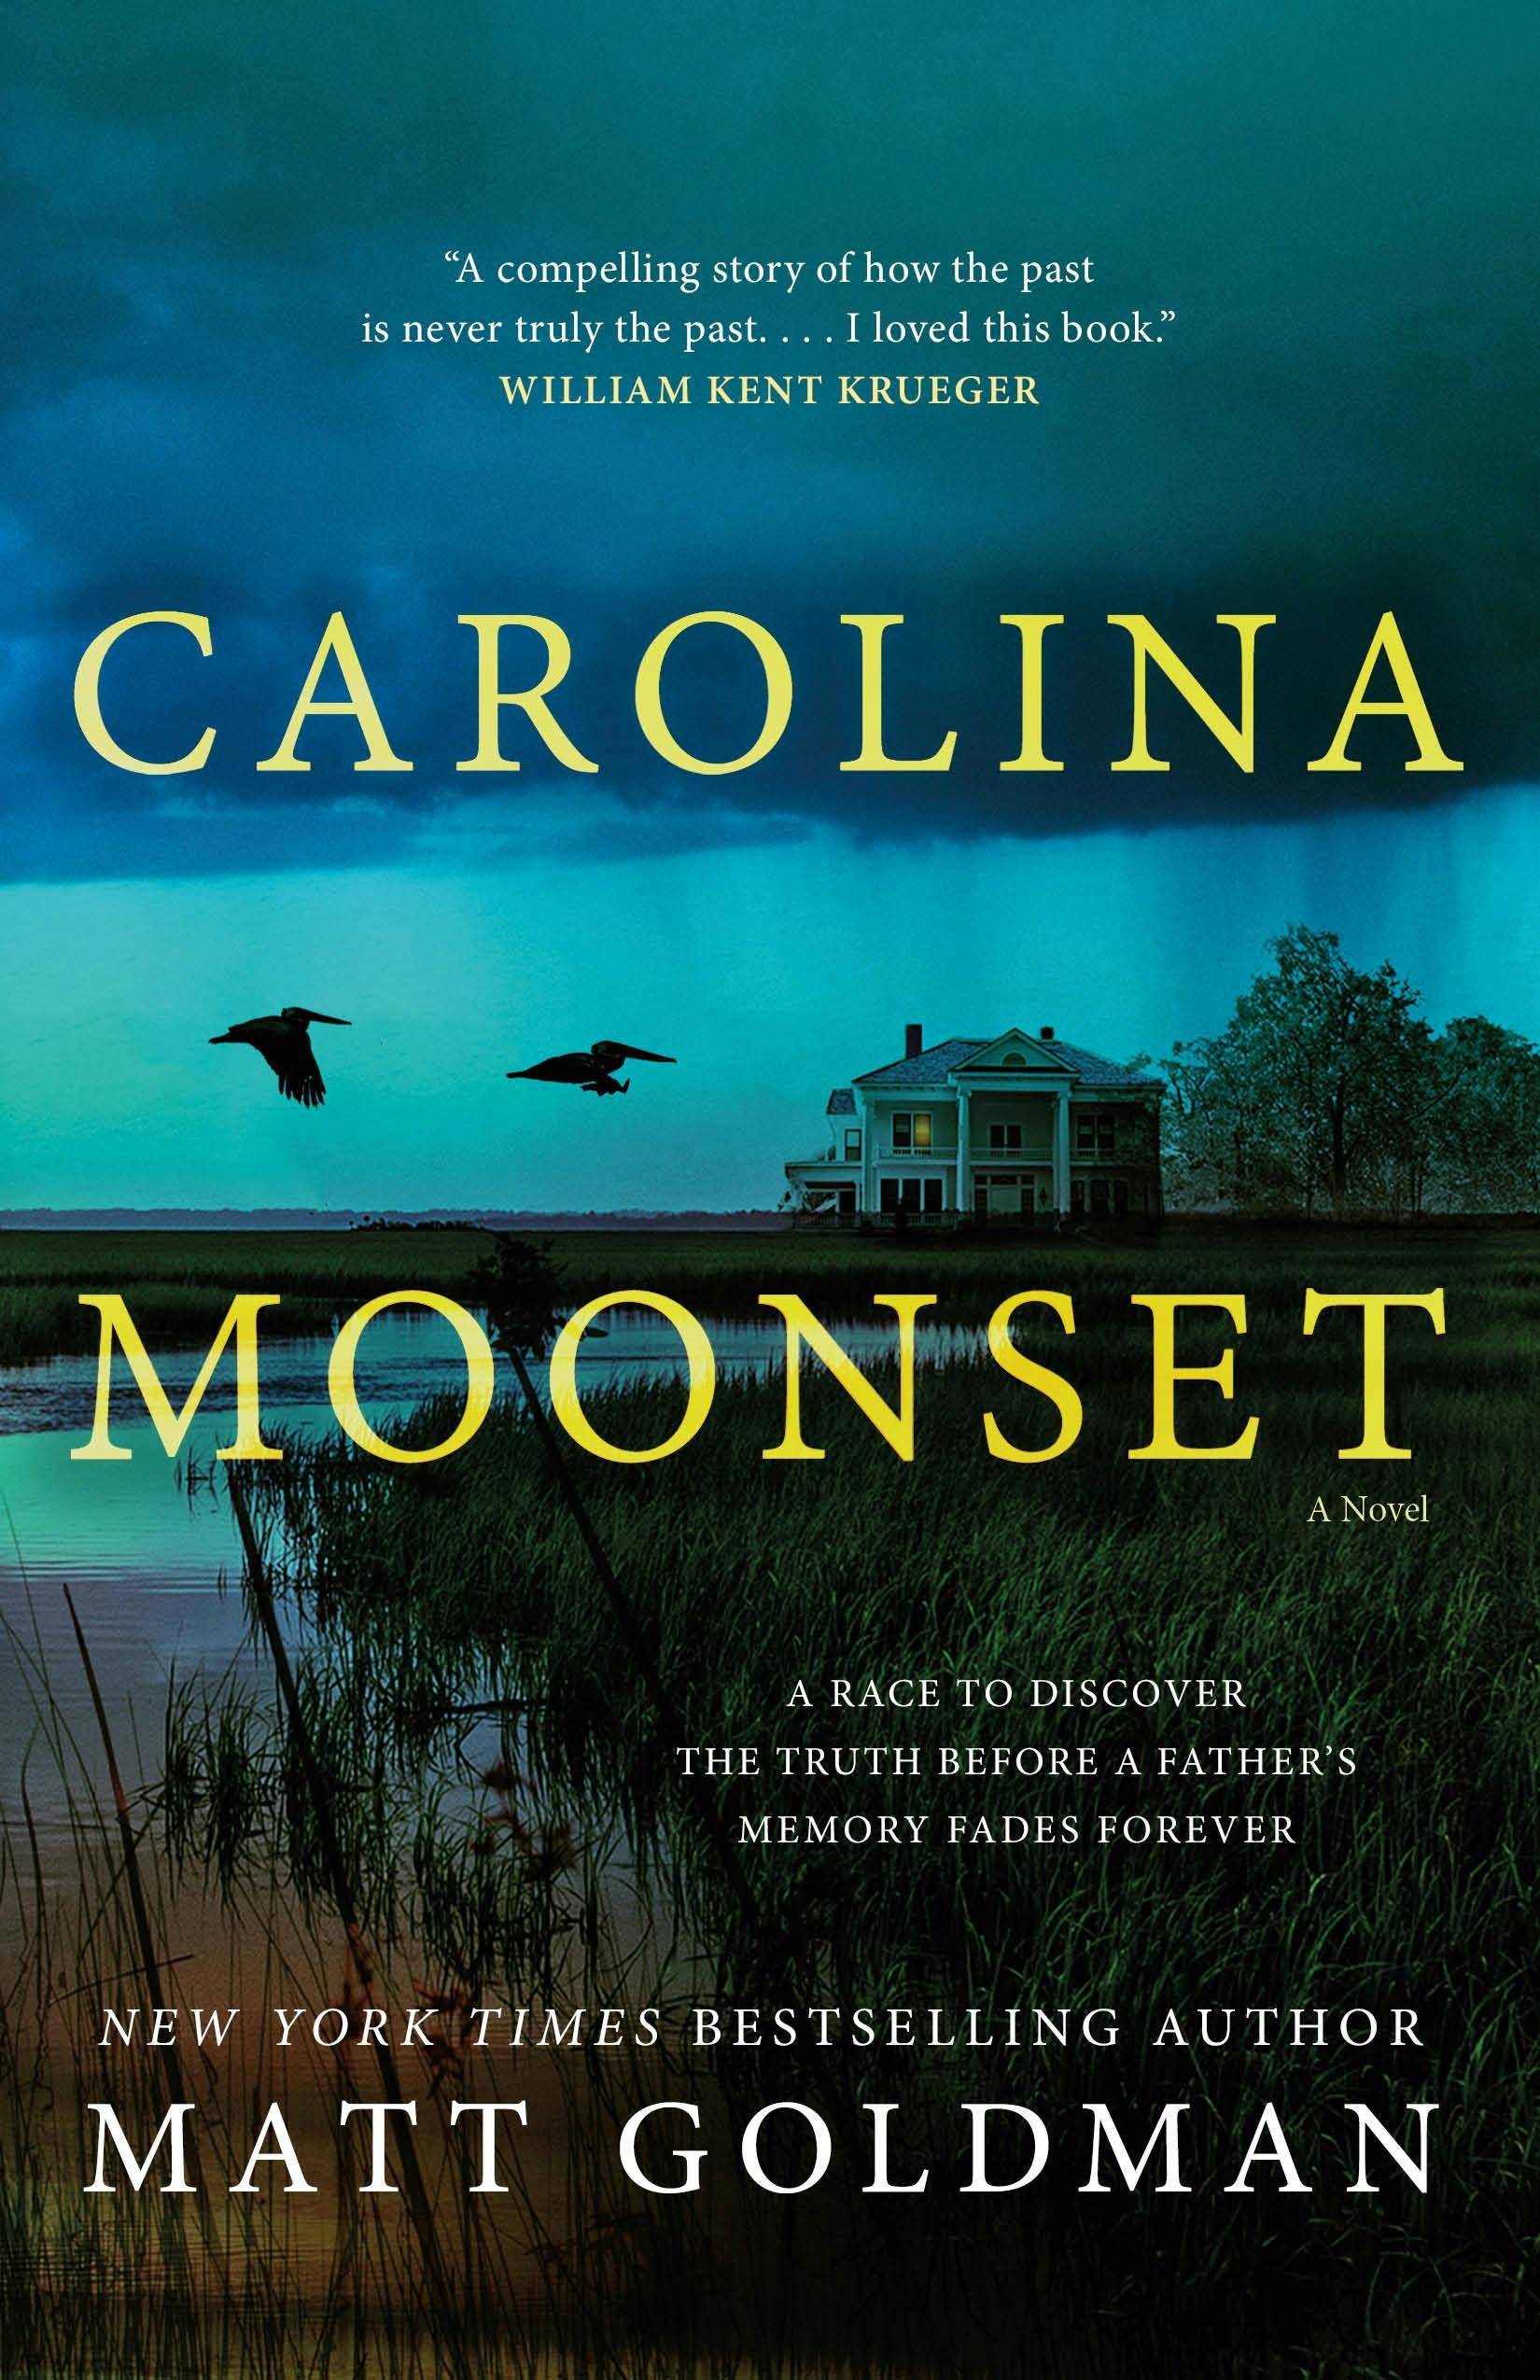 Cover for the book titled as: Carolina Moonset